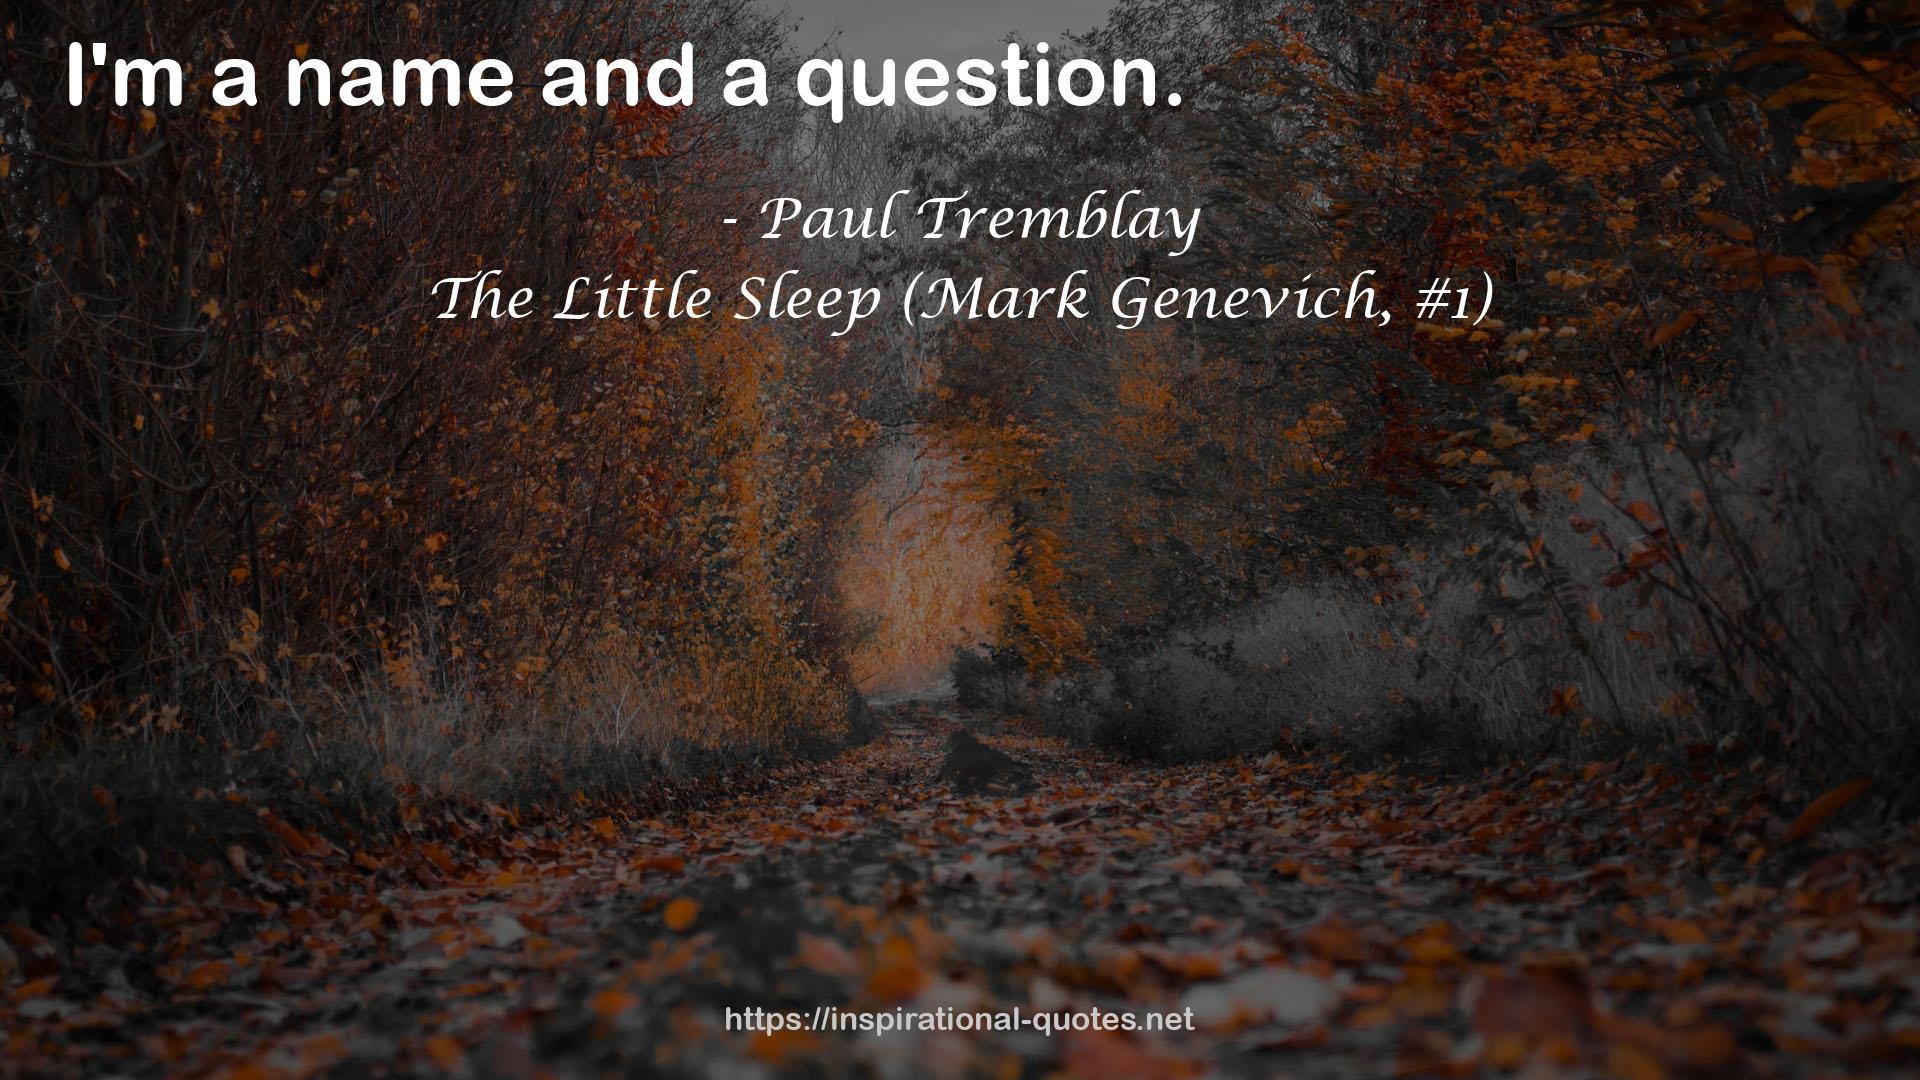 The Little Sleep (Mark Genevich, #1) QUOTES